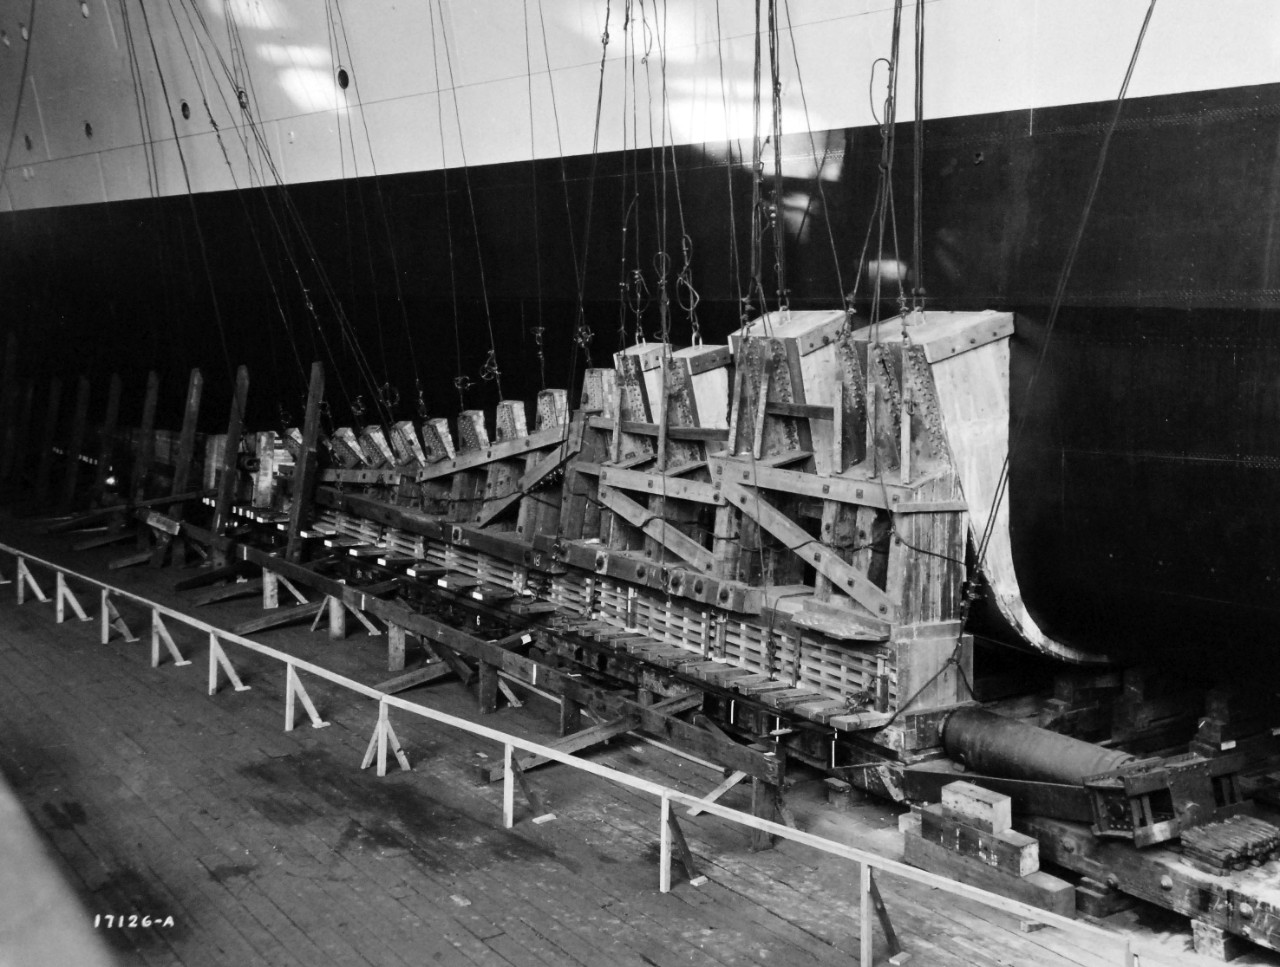 19-LC-61836c:    USS Indianapolis (CA-35), 1931.   Forward packing at the launching at the New York Shipbuilding Corporation, November 7, 1931.   Indianapolis was commissioned on November 15, 1932 and was later sunk during World War II by Japanese submarine I-58 on July 30, 1945.    Official U.S. Navy Photograph, now in the collections of the National Archives.   (2015/2/3).   